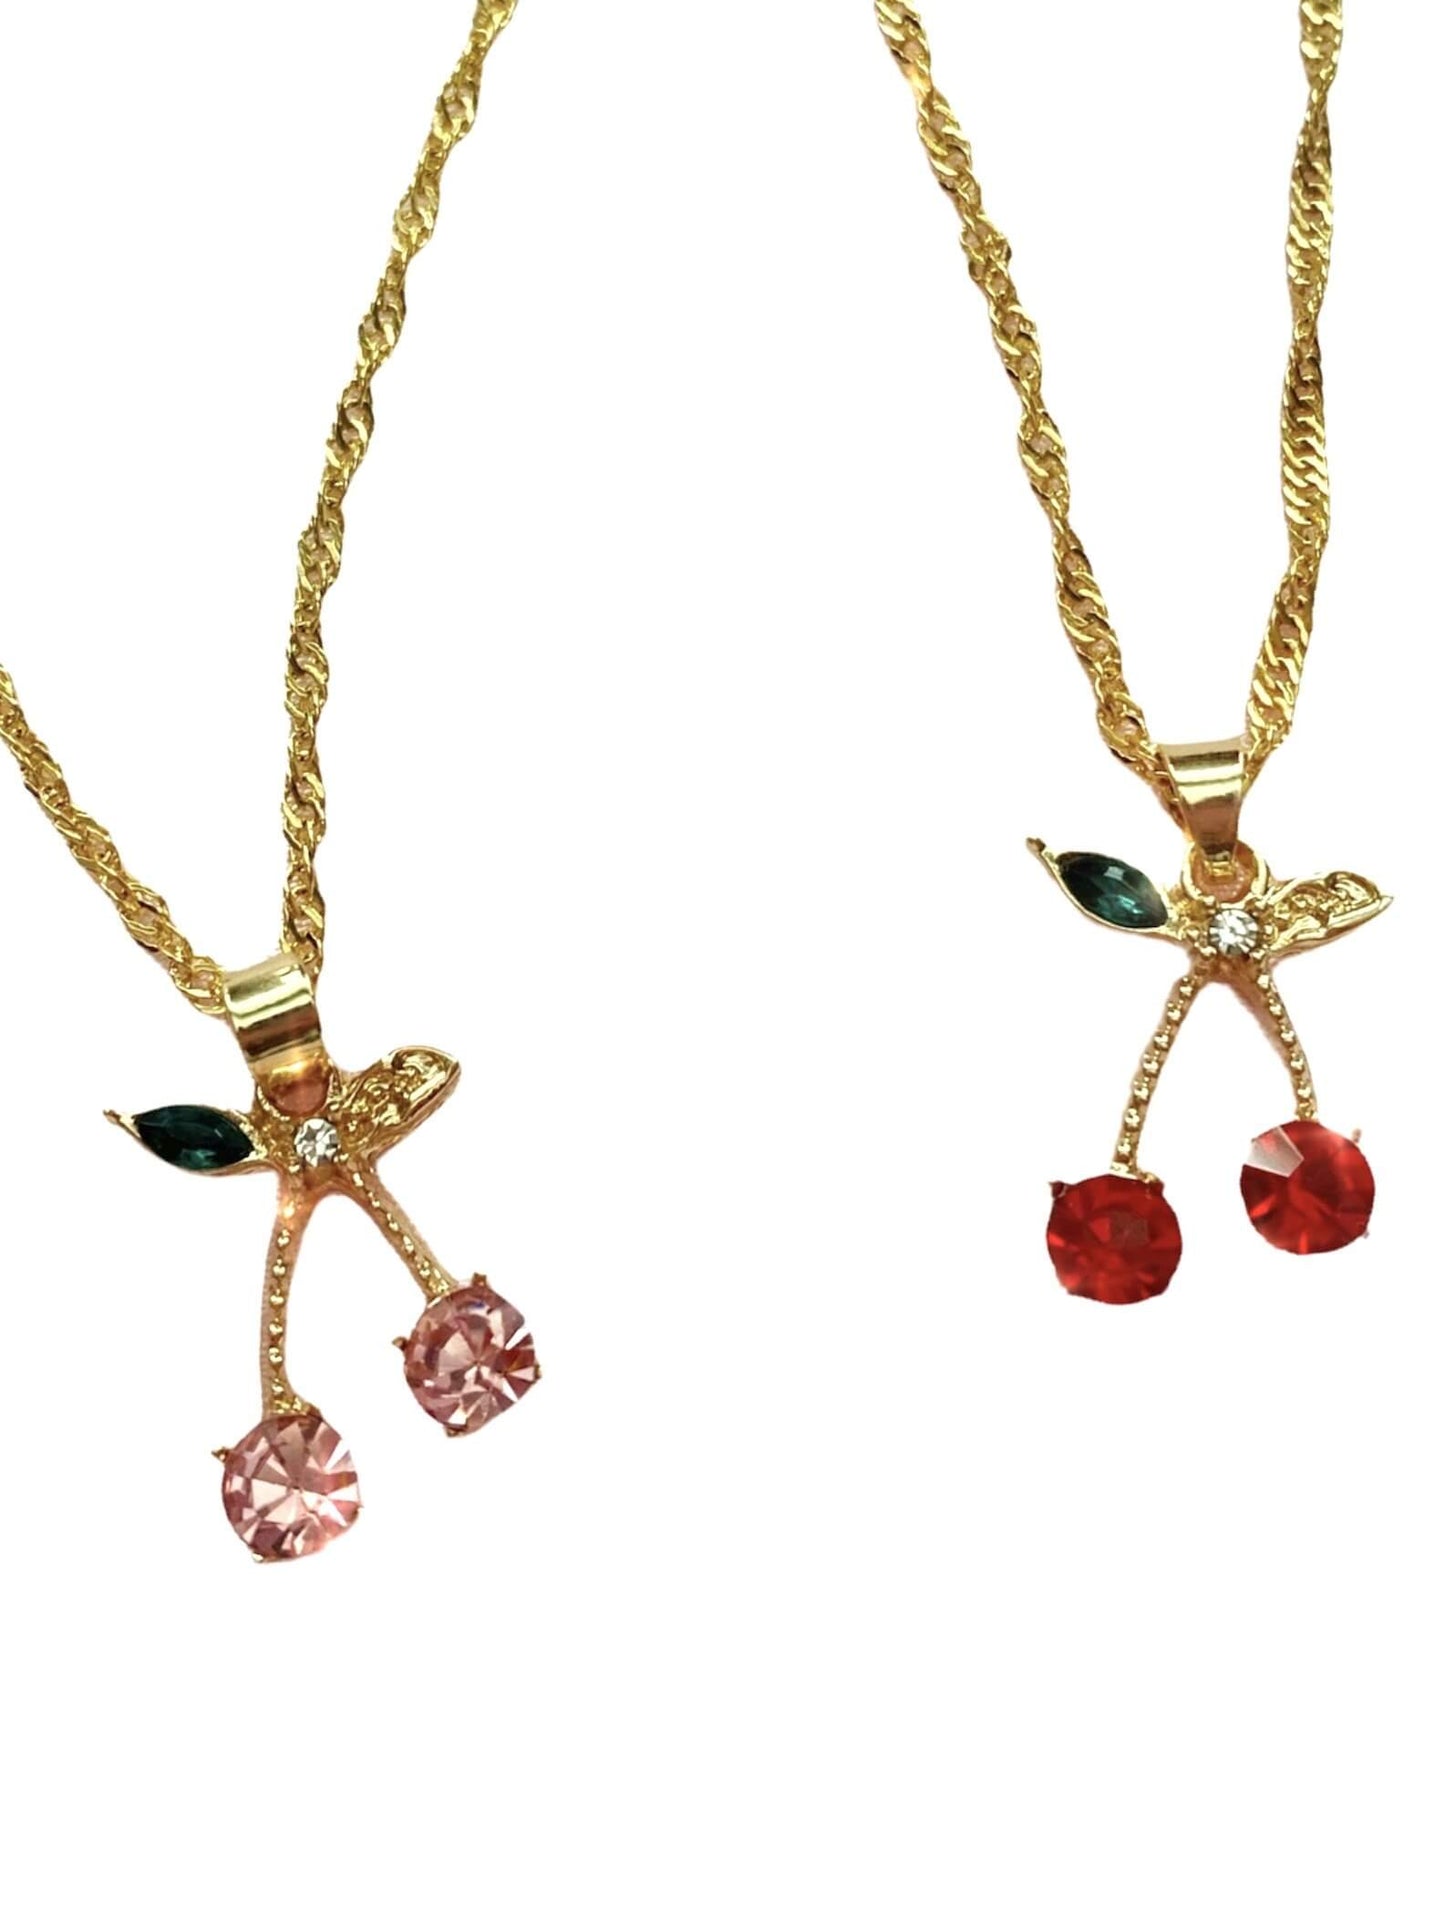 Icy Cherry Necklace (Pink or Red) - Luna Alaska Jewelry